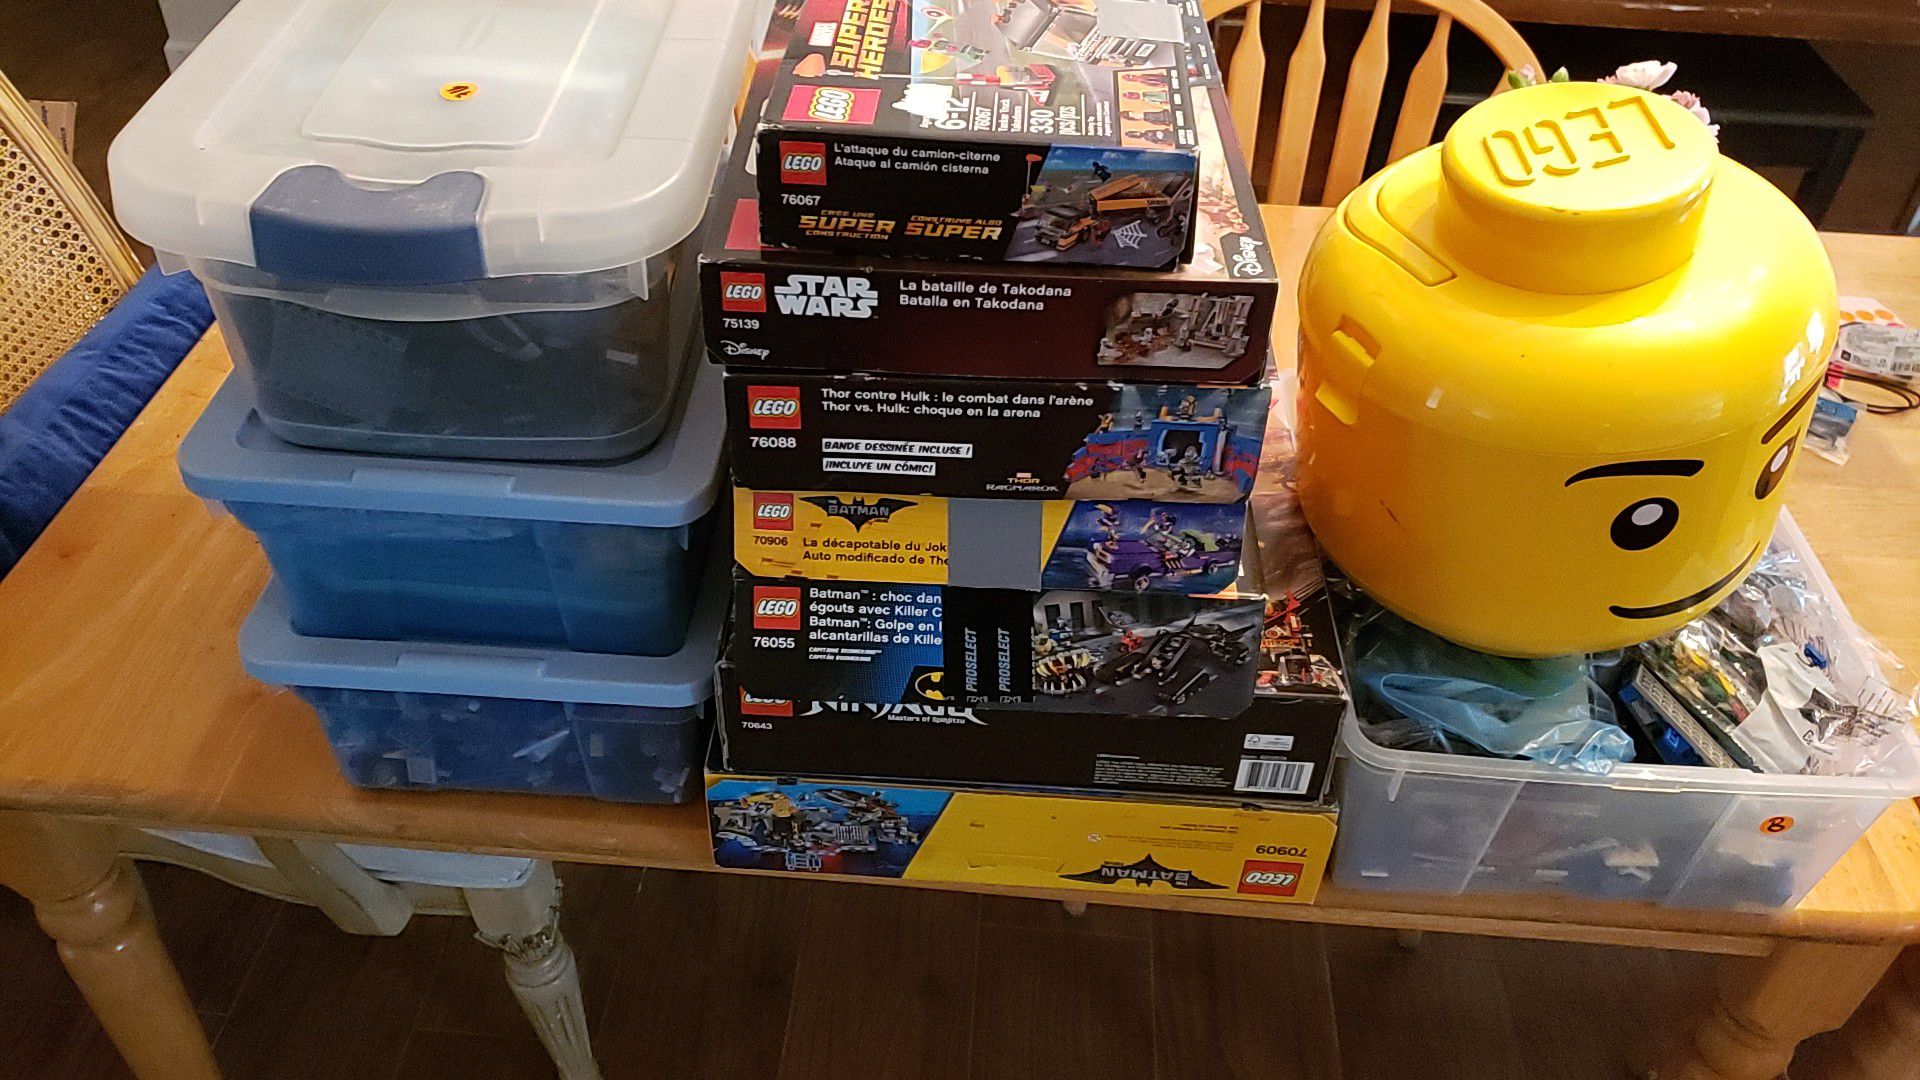 Legos lot 41 lbs in all. 30 lbs of loose legos and 11lbs of opened boxes some minifigures inside sets